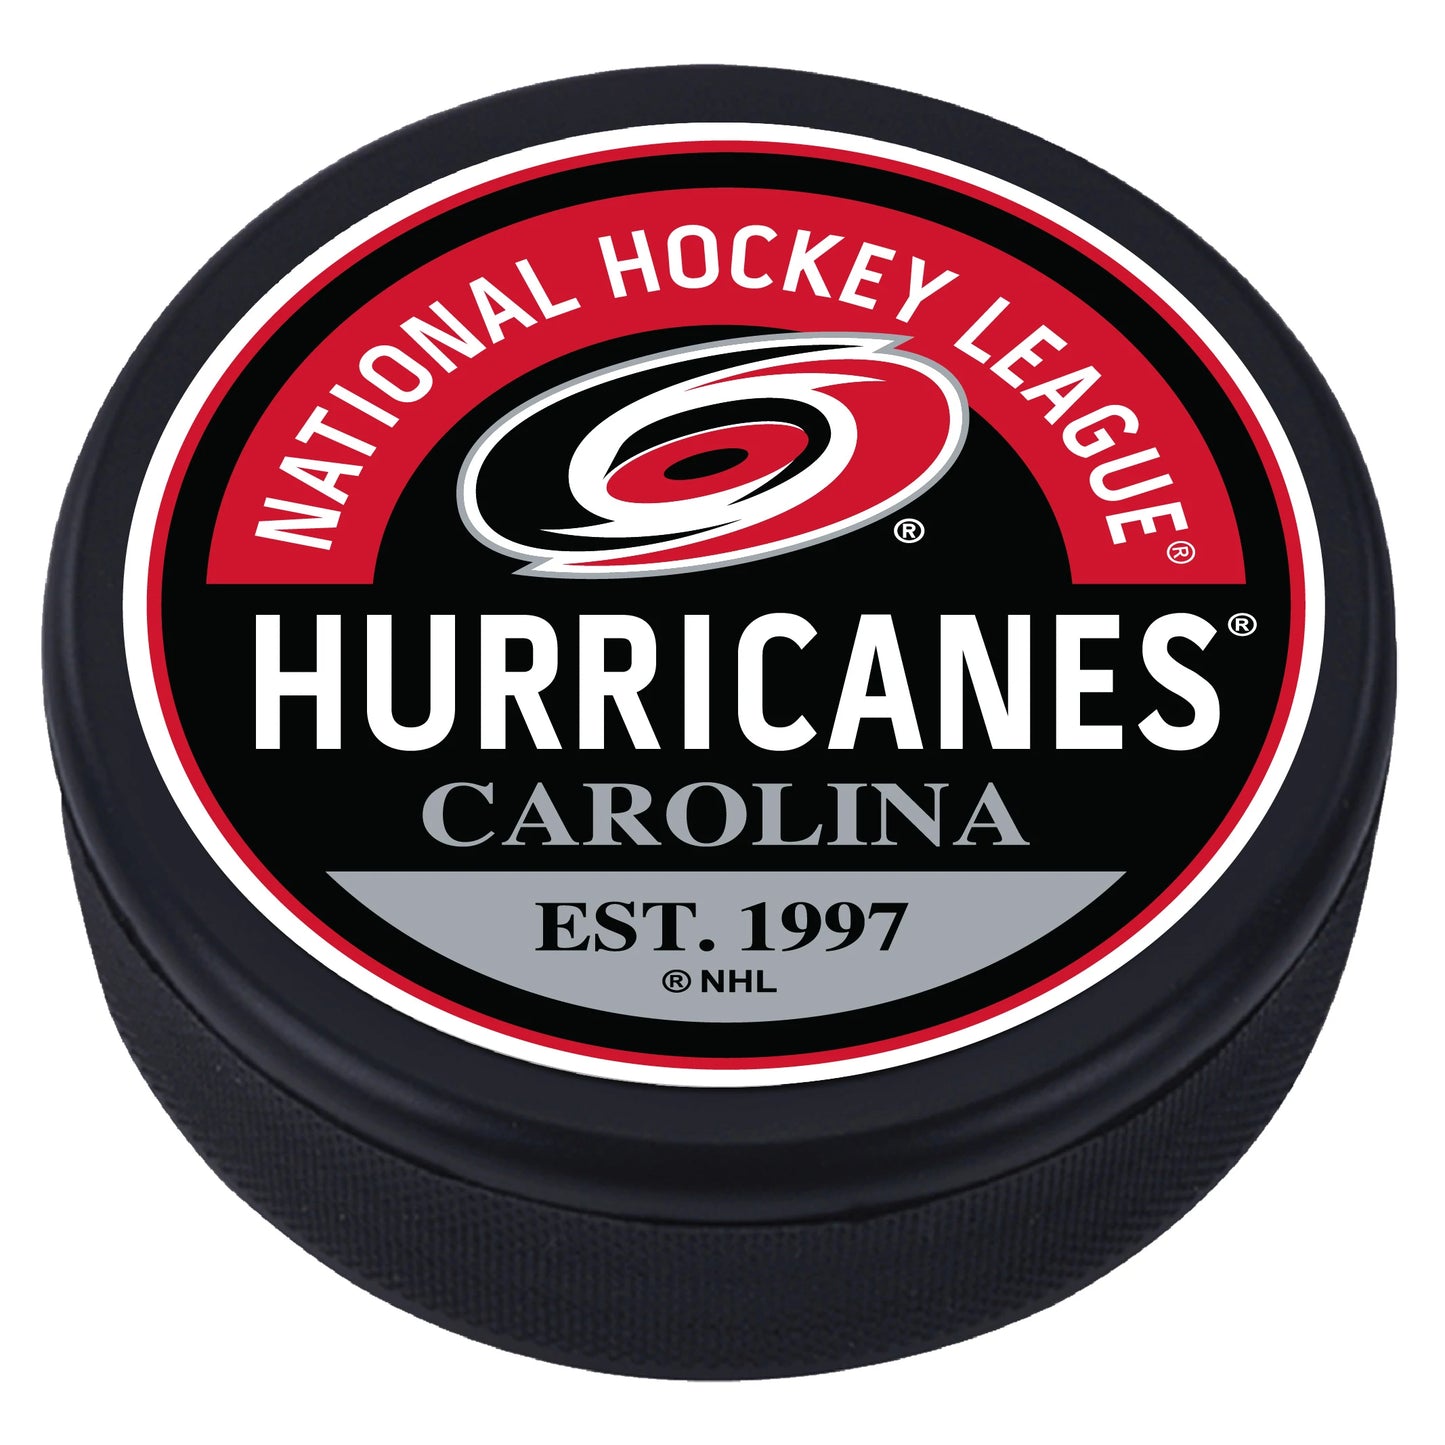 Hockey puck in Mustang's 'Block' style featuring "National Hockey League", the Hurricanes primary logo, "Hurricanes Carolina" , and "Est. 1997" on the top face.